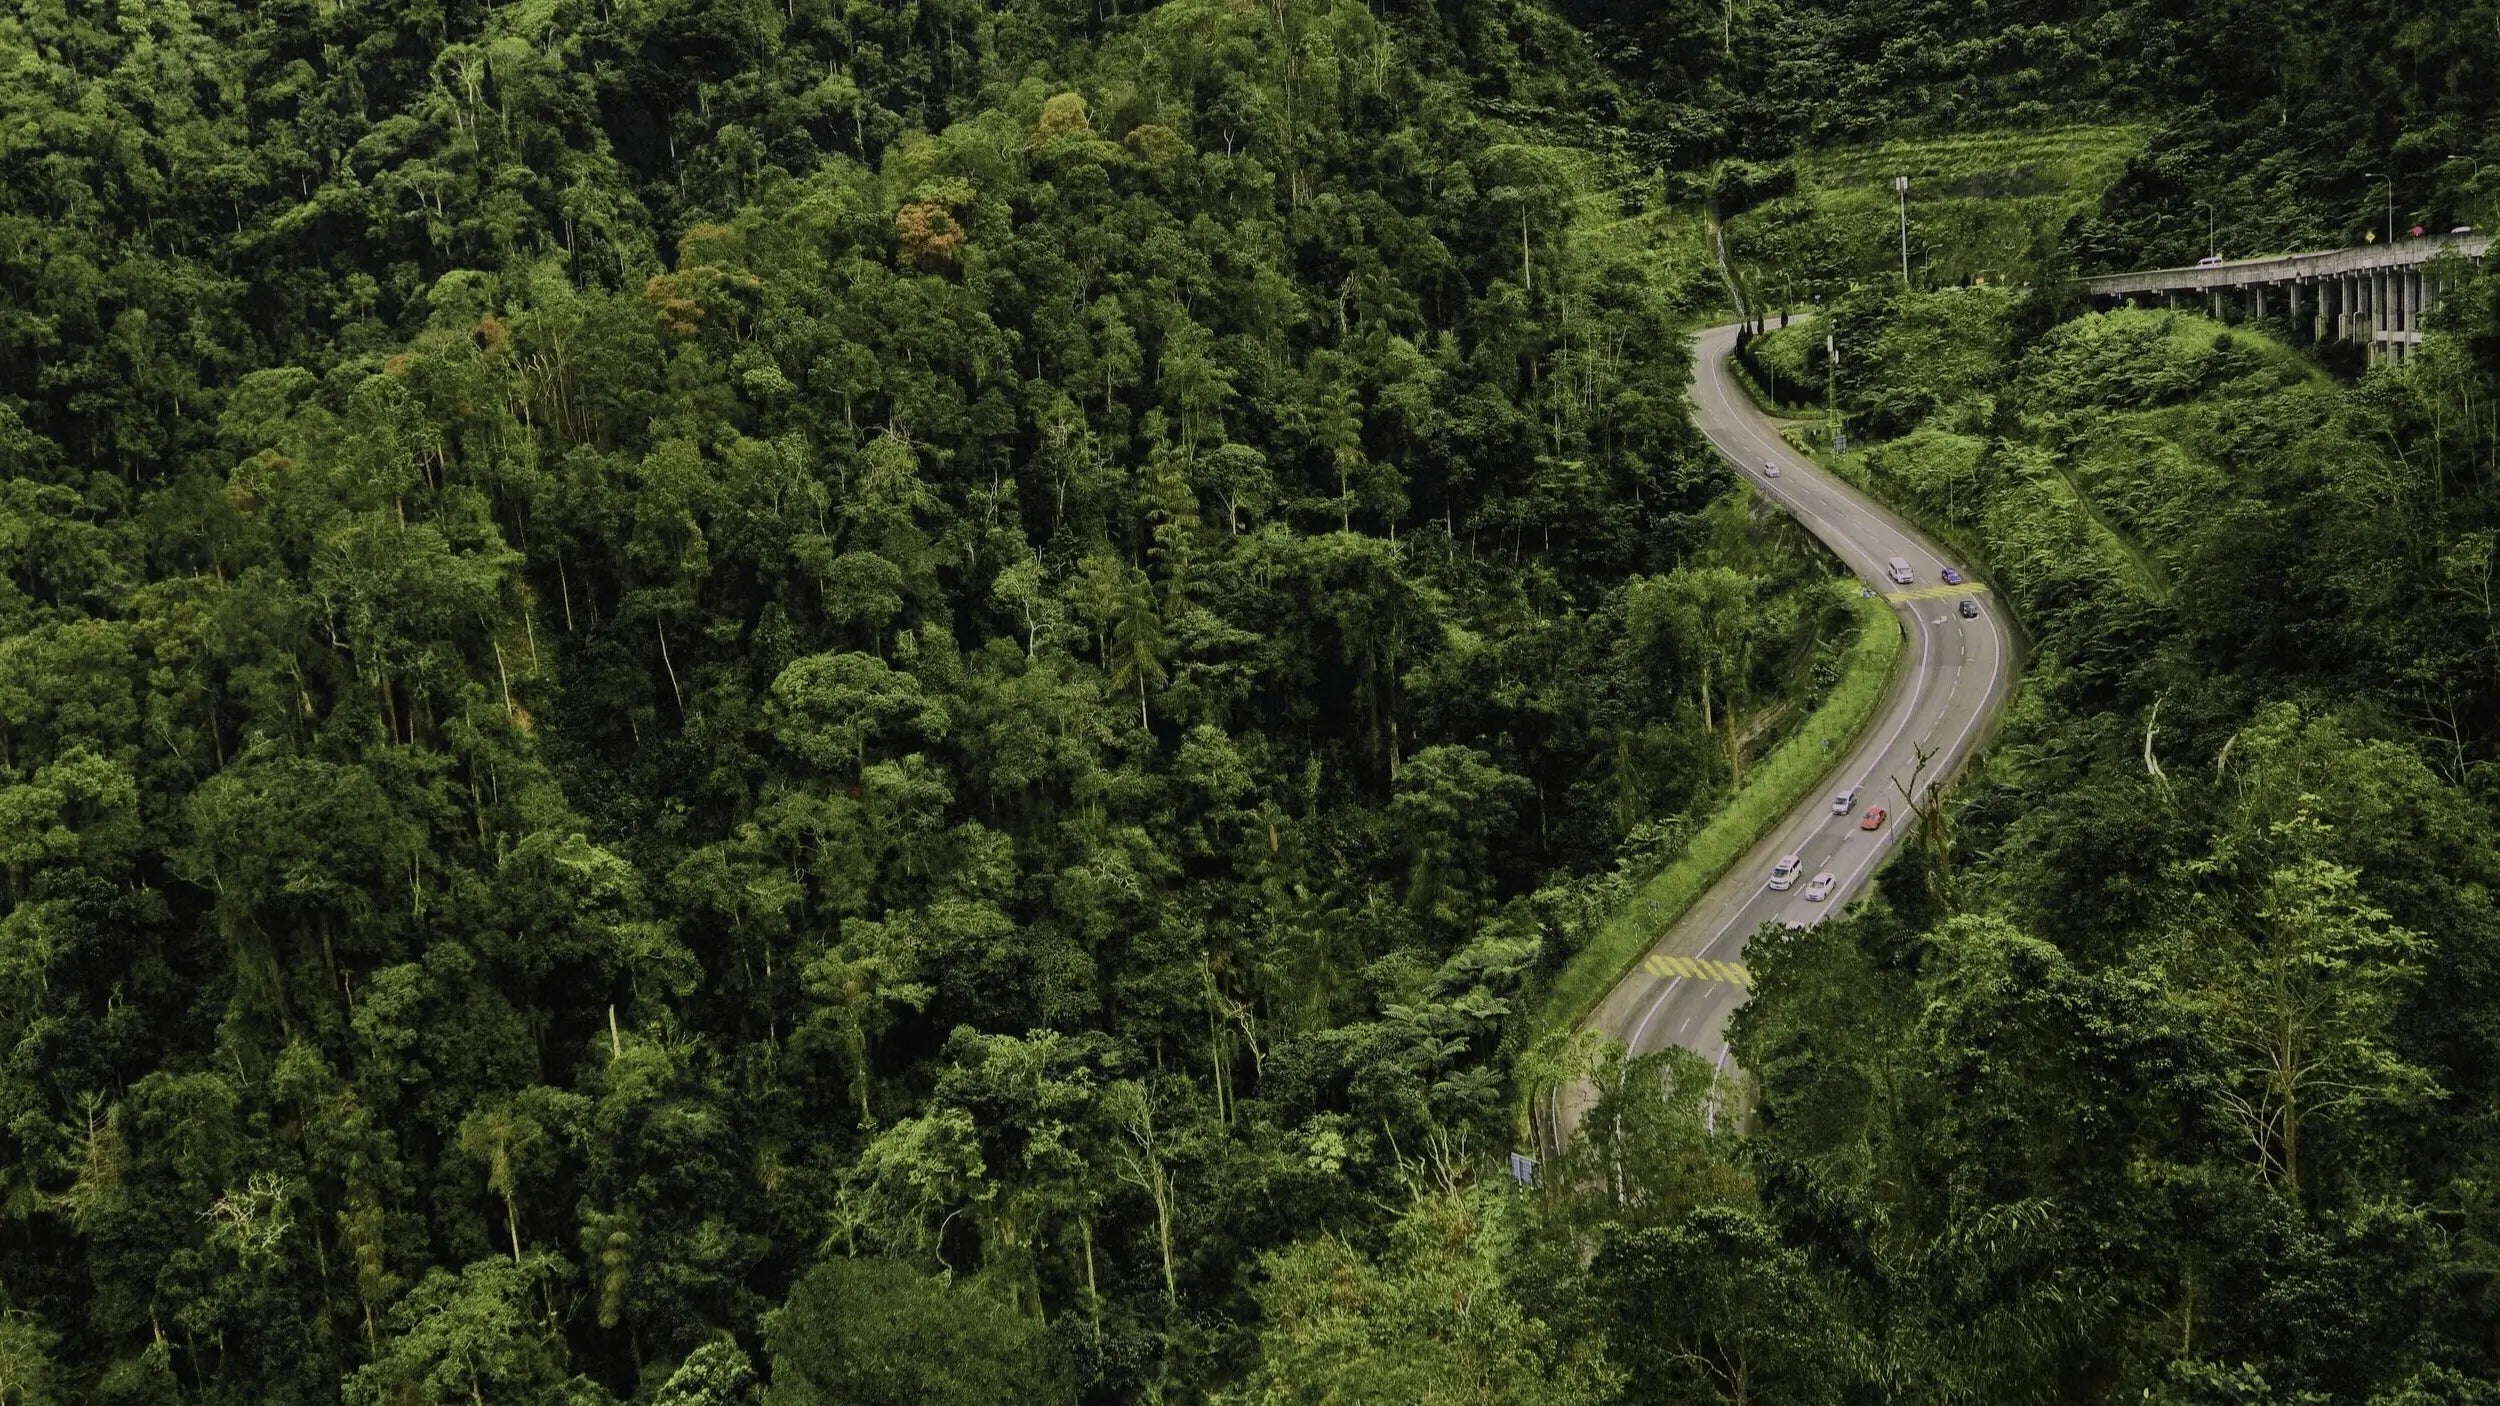 A winding road through a dense forest with a bridge on the right. Vehicles can be seen traveling on the road. The photo appears to be taken from a high vantage point.